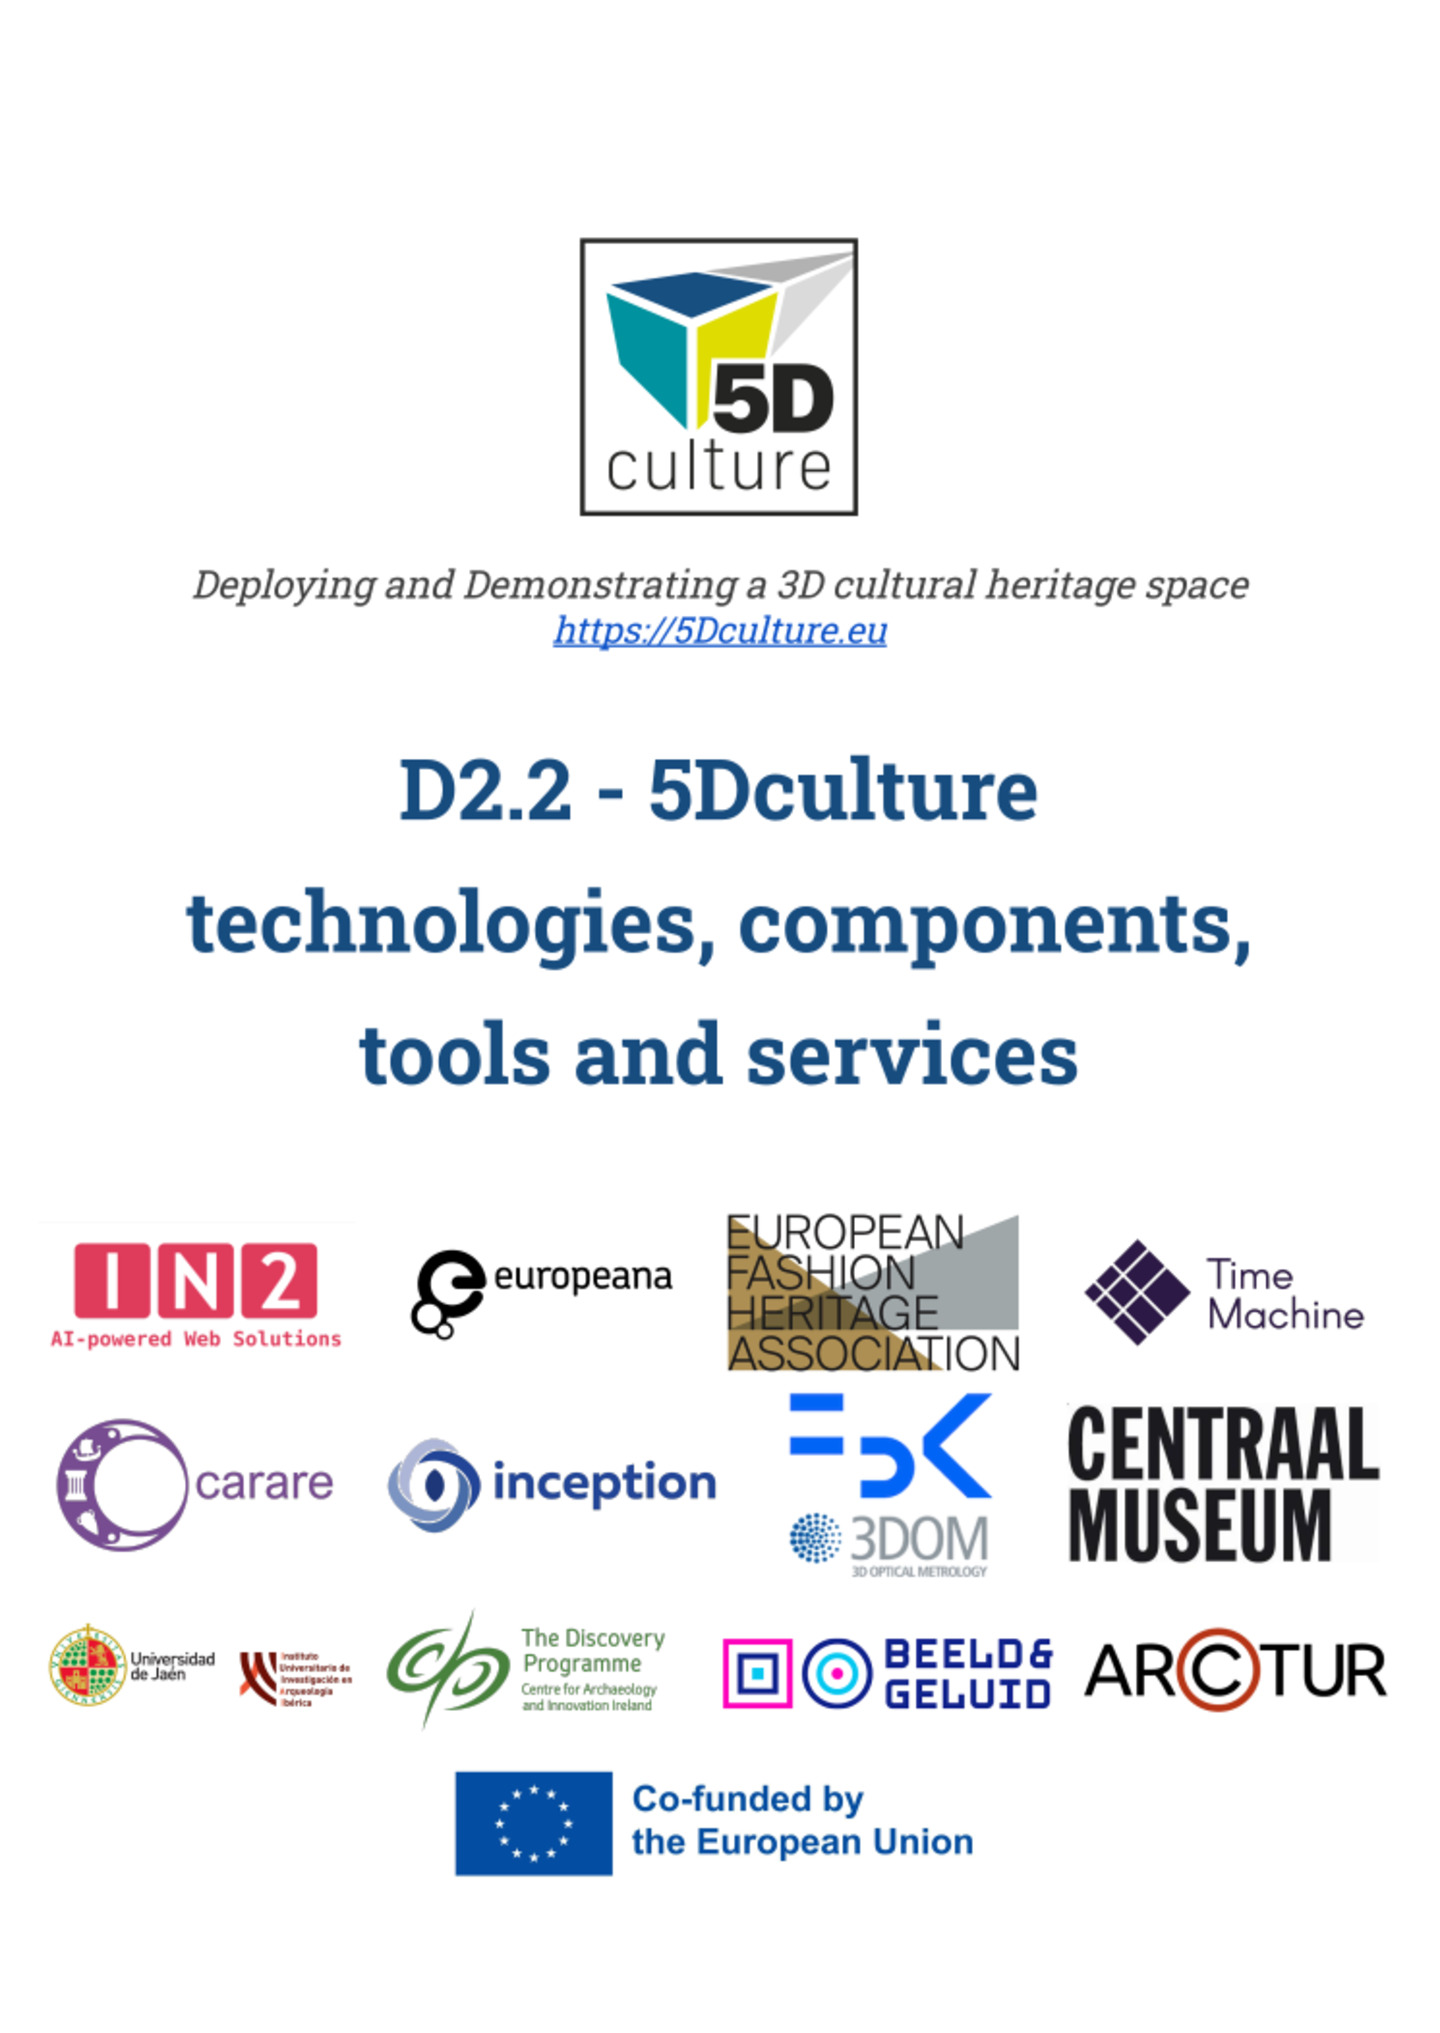 D2.2 - 5Dculture technologies, components, tools and services